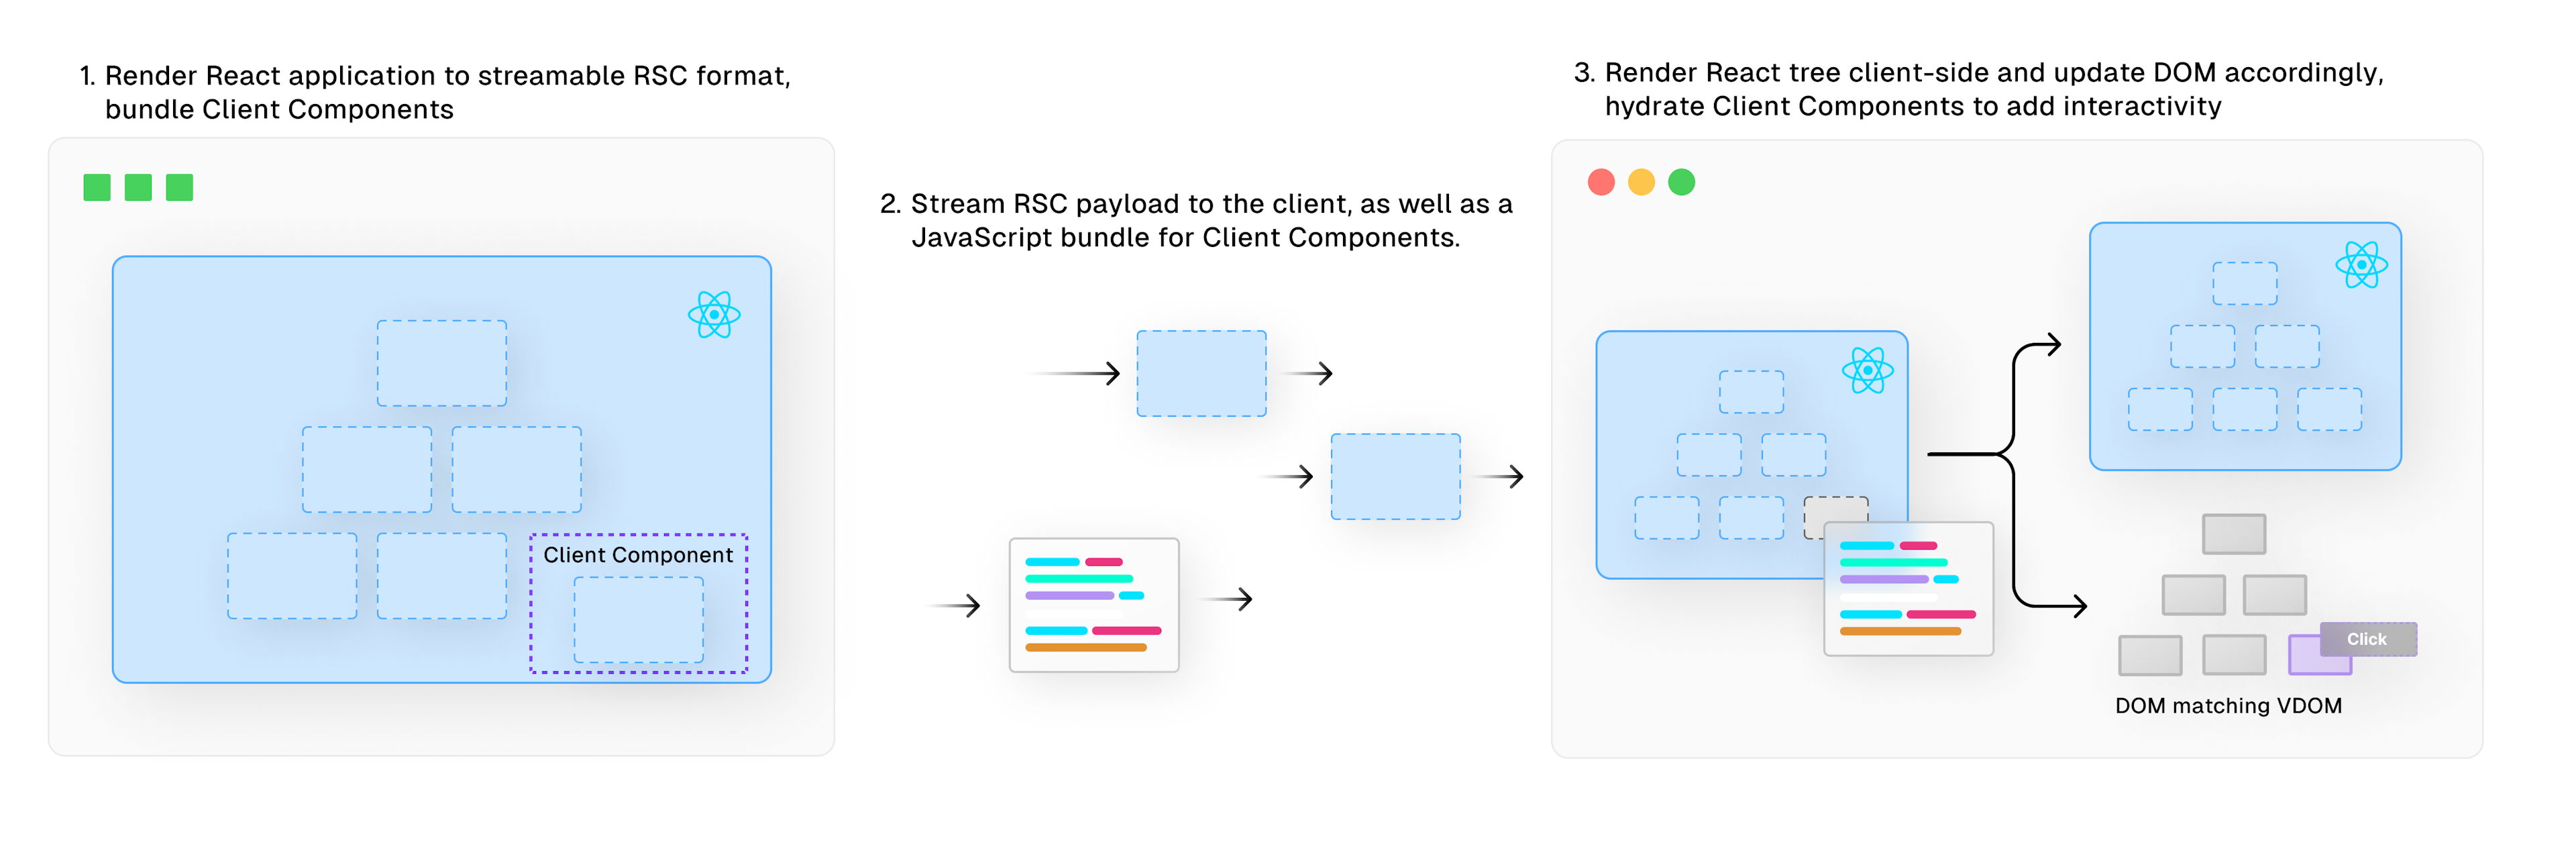 Note: Framework implementations may differ. For example, Next.js will prerender Client Components to HTML on the server, similar to the traditional SSR approach. By default, however, Client Components are rendered similar to the CSR approach.